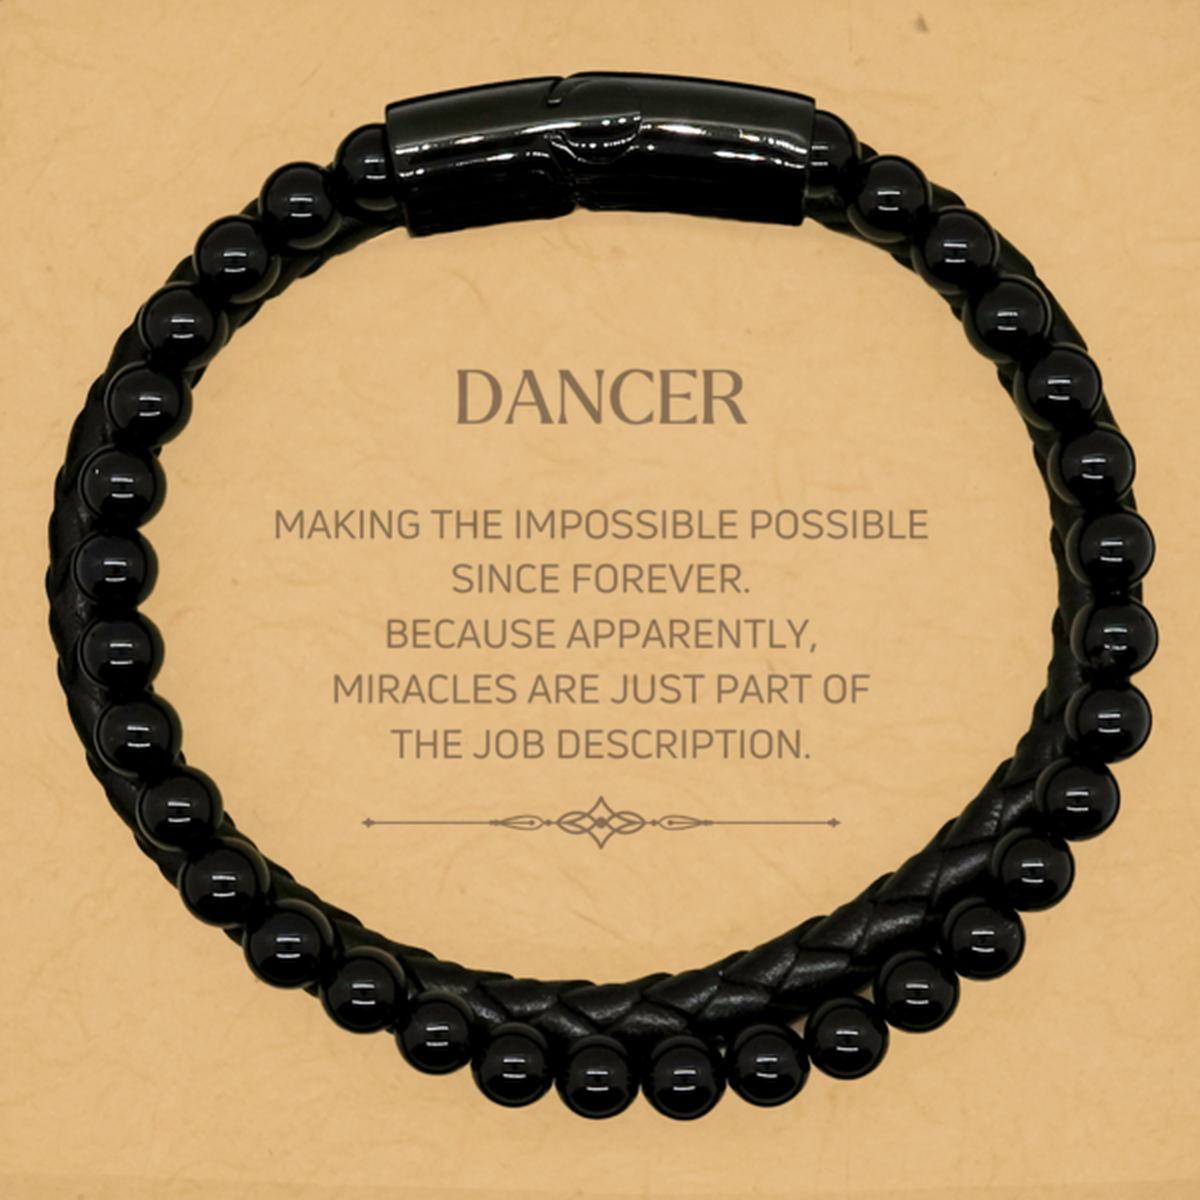 Funny Dancer Gifts, Miracles are just part of the job description, Inspirational Birthday Stone Leather Bracelets For Dancer, Men, Women, Coworkers, Friends, Boss